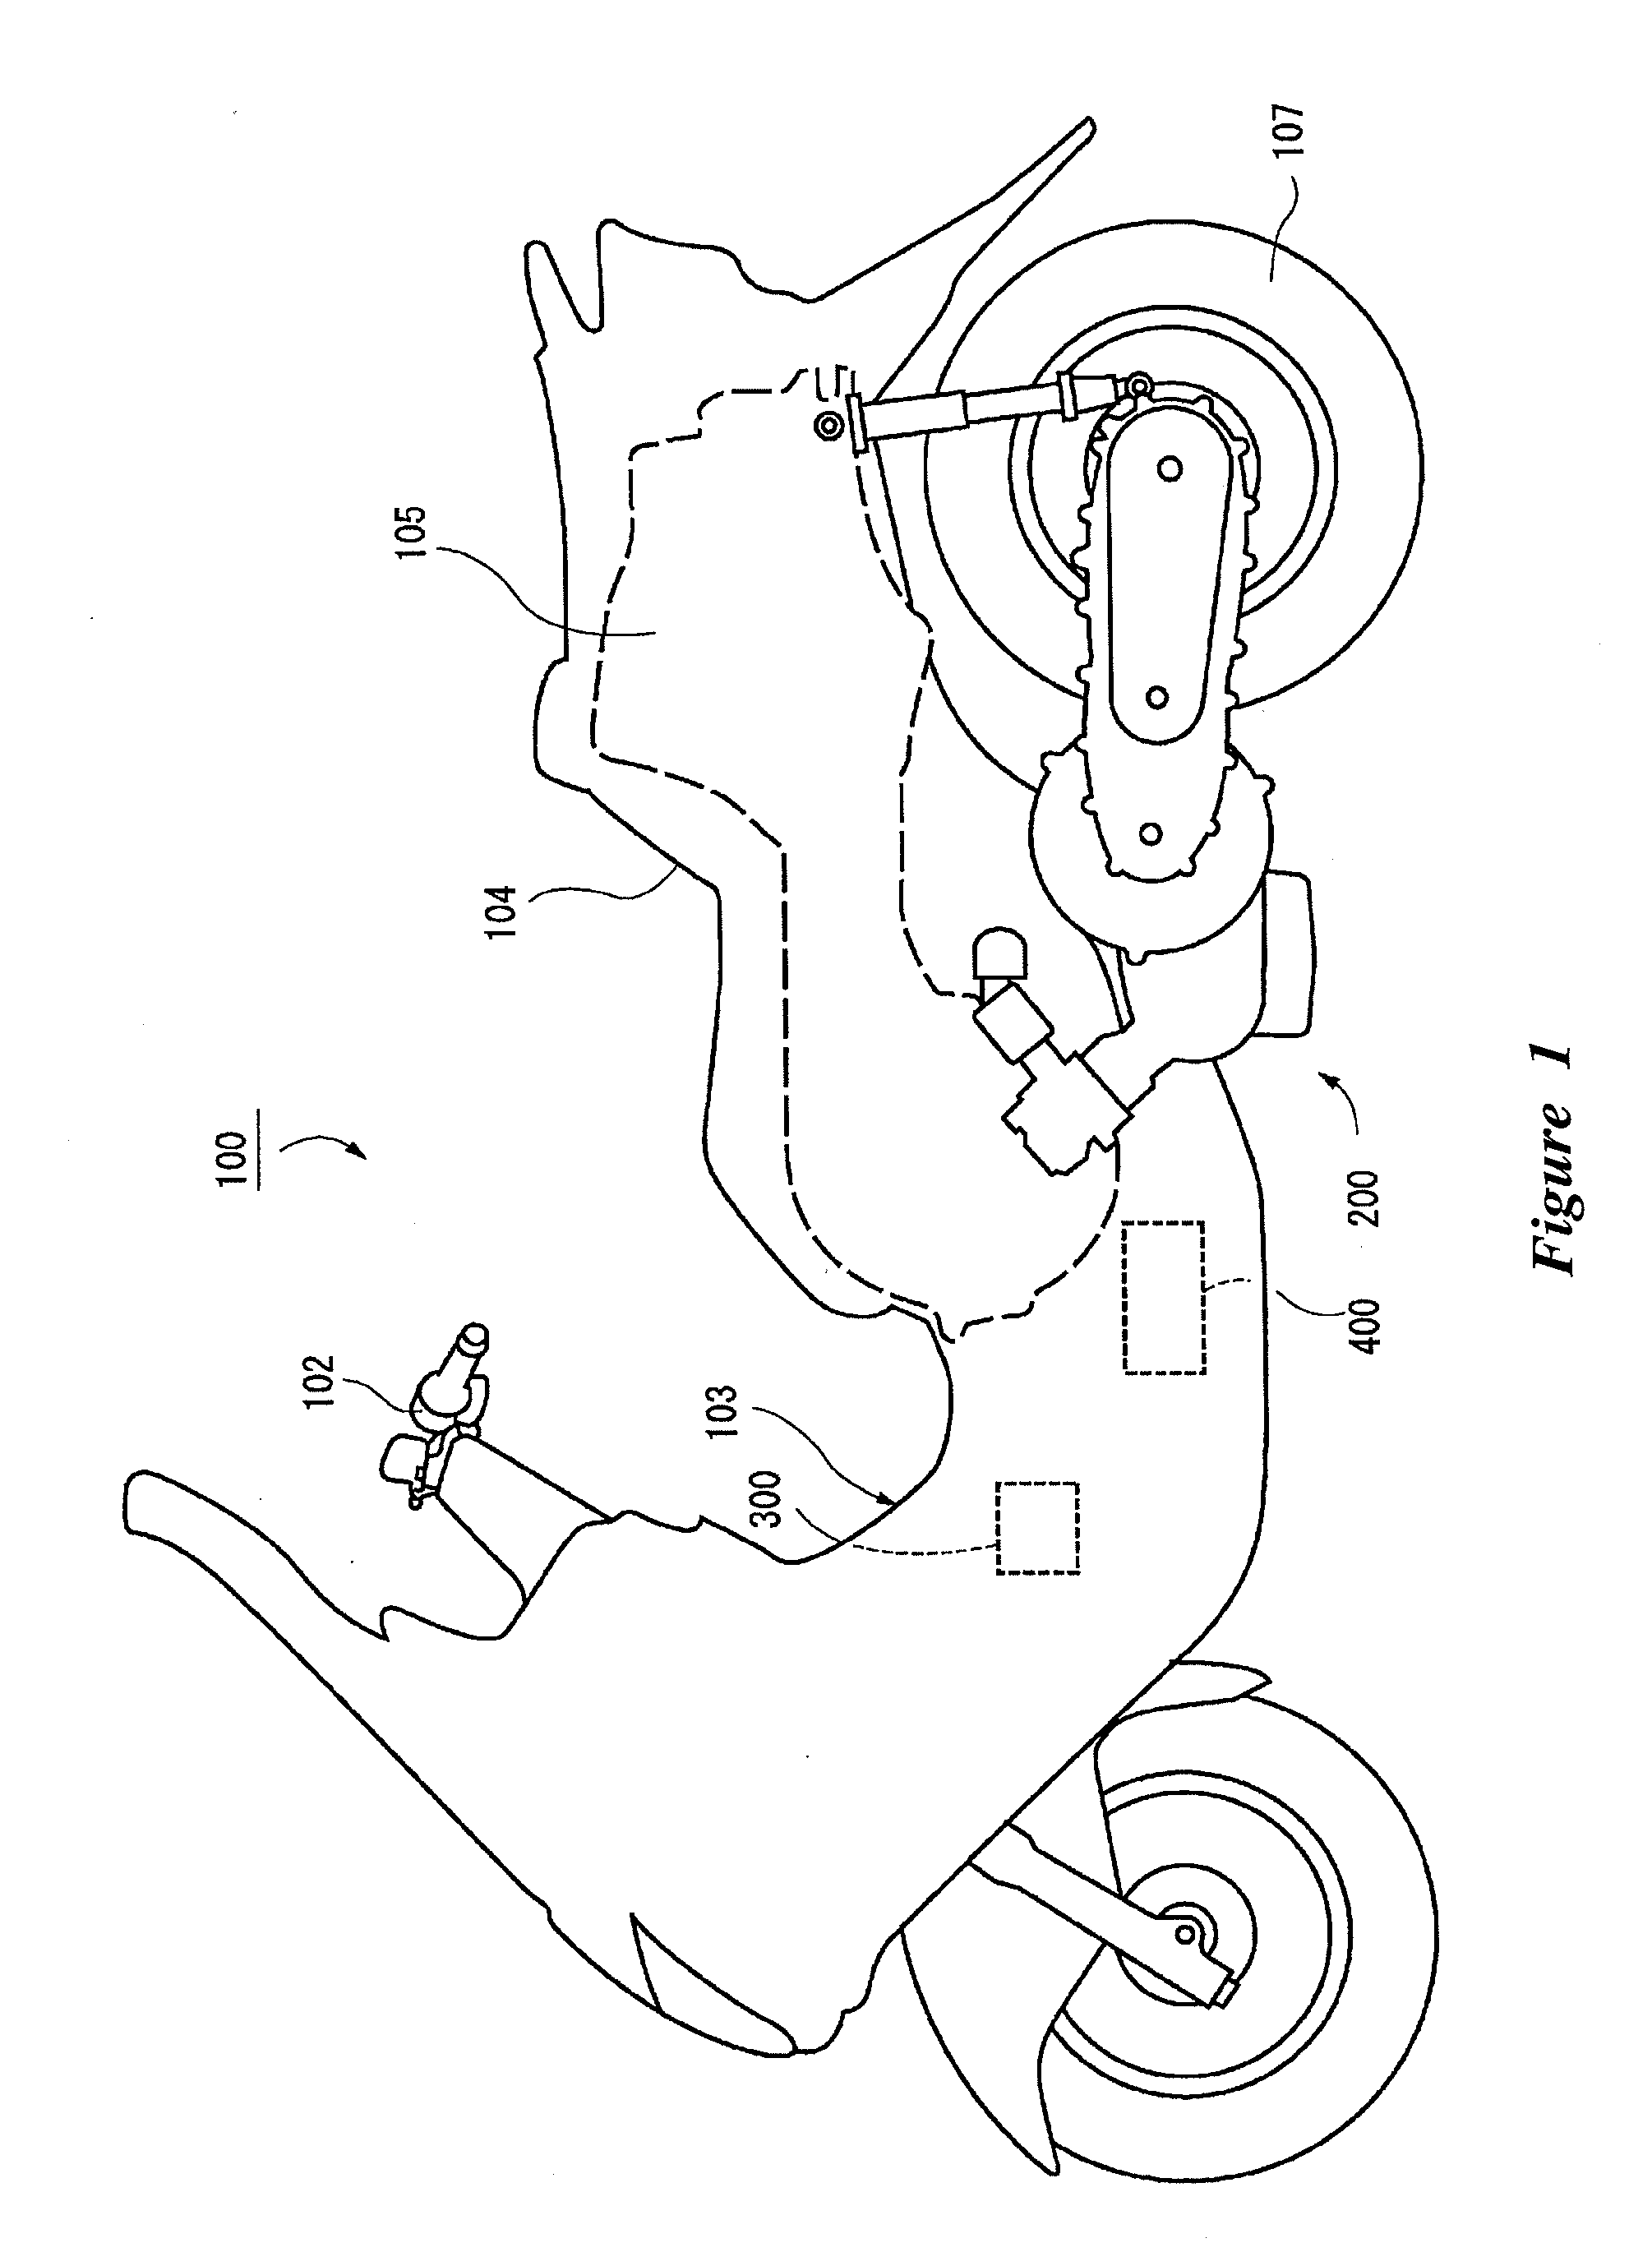 Driving device for hybrid vehicle, and hybrid vehicle incorporating the same